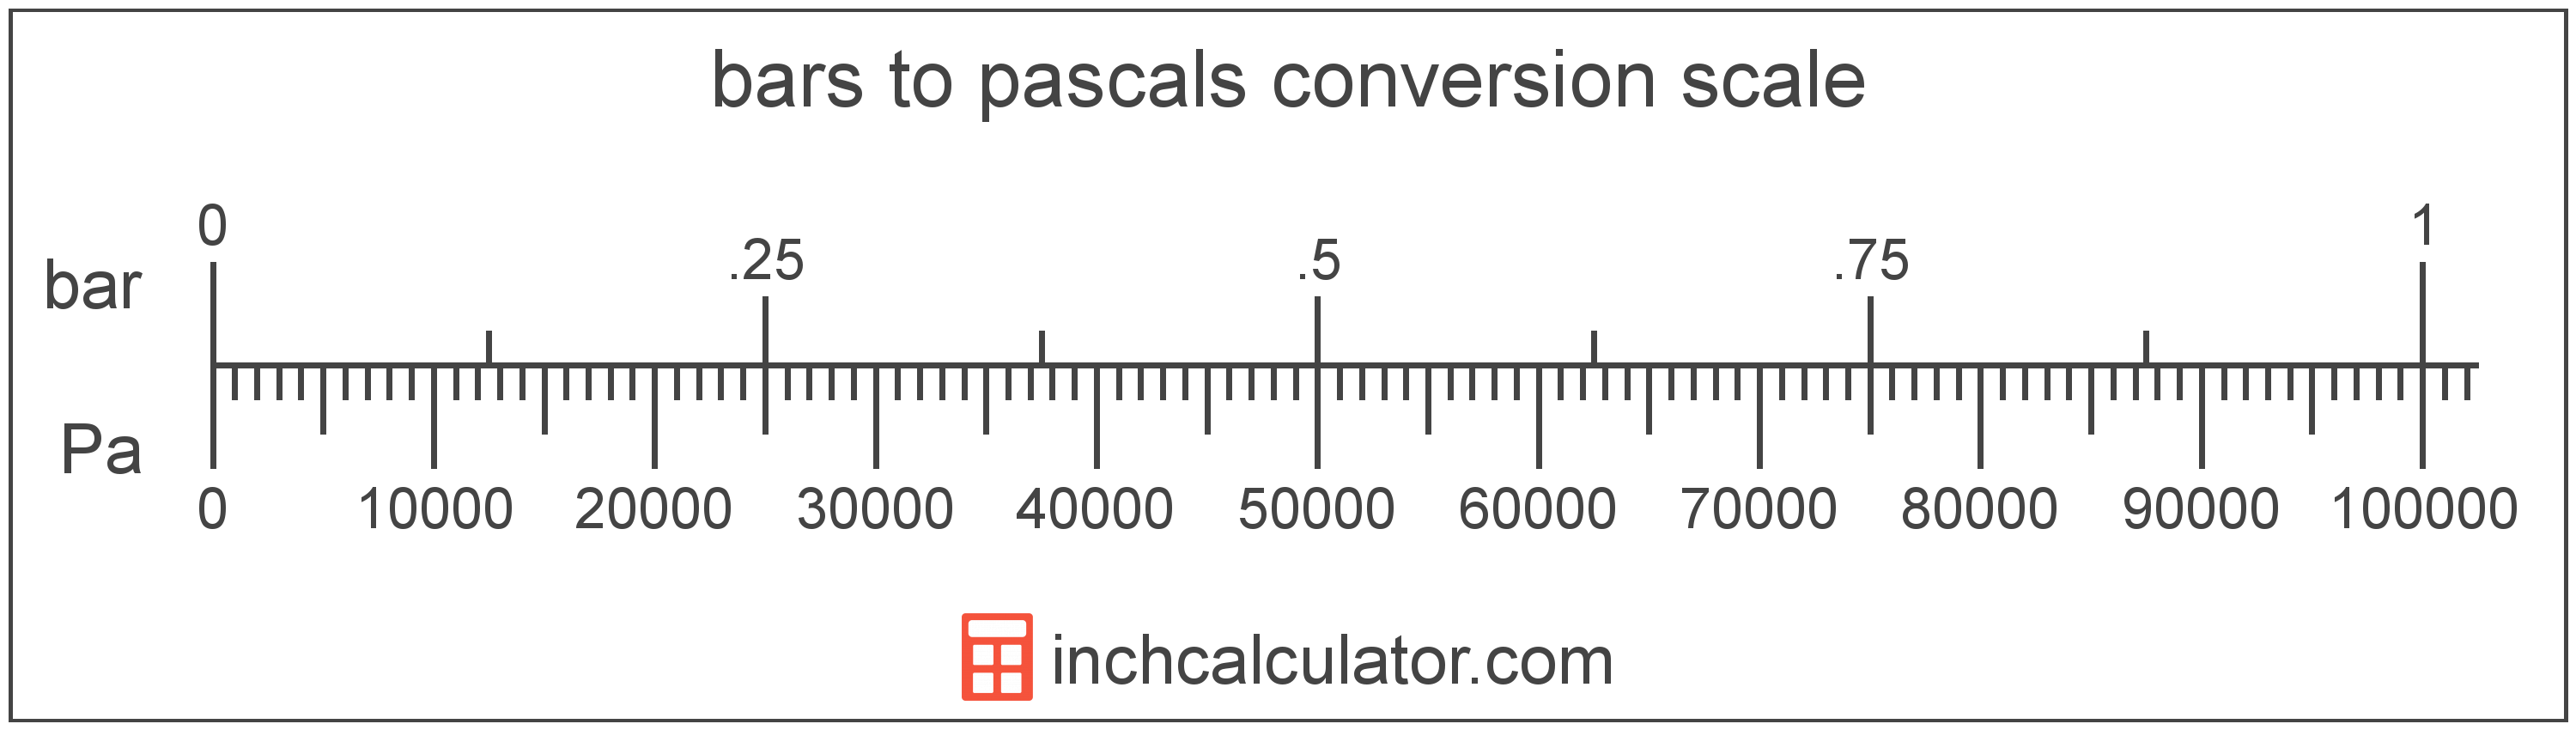 Bars to Pascals Conversion (bar to Pa) - Inch Calculator